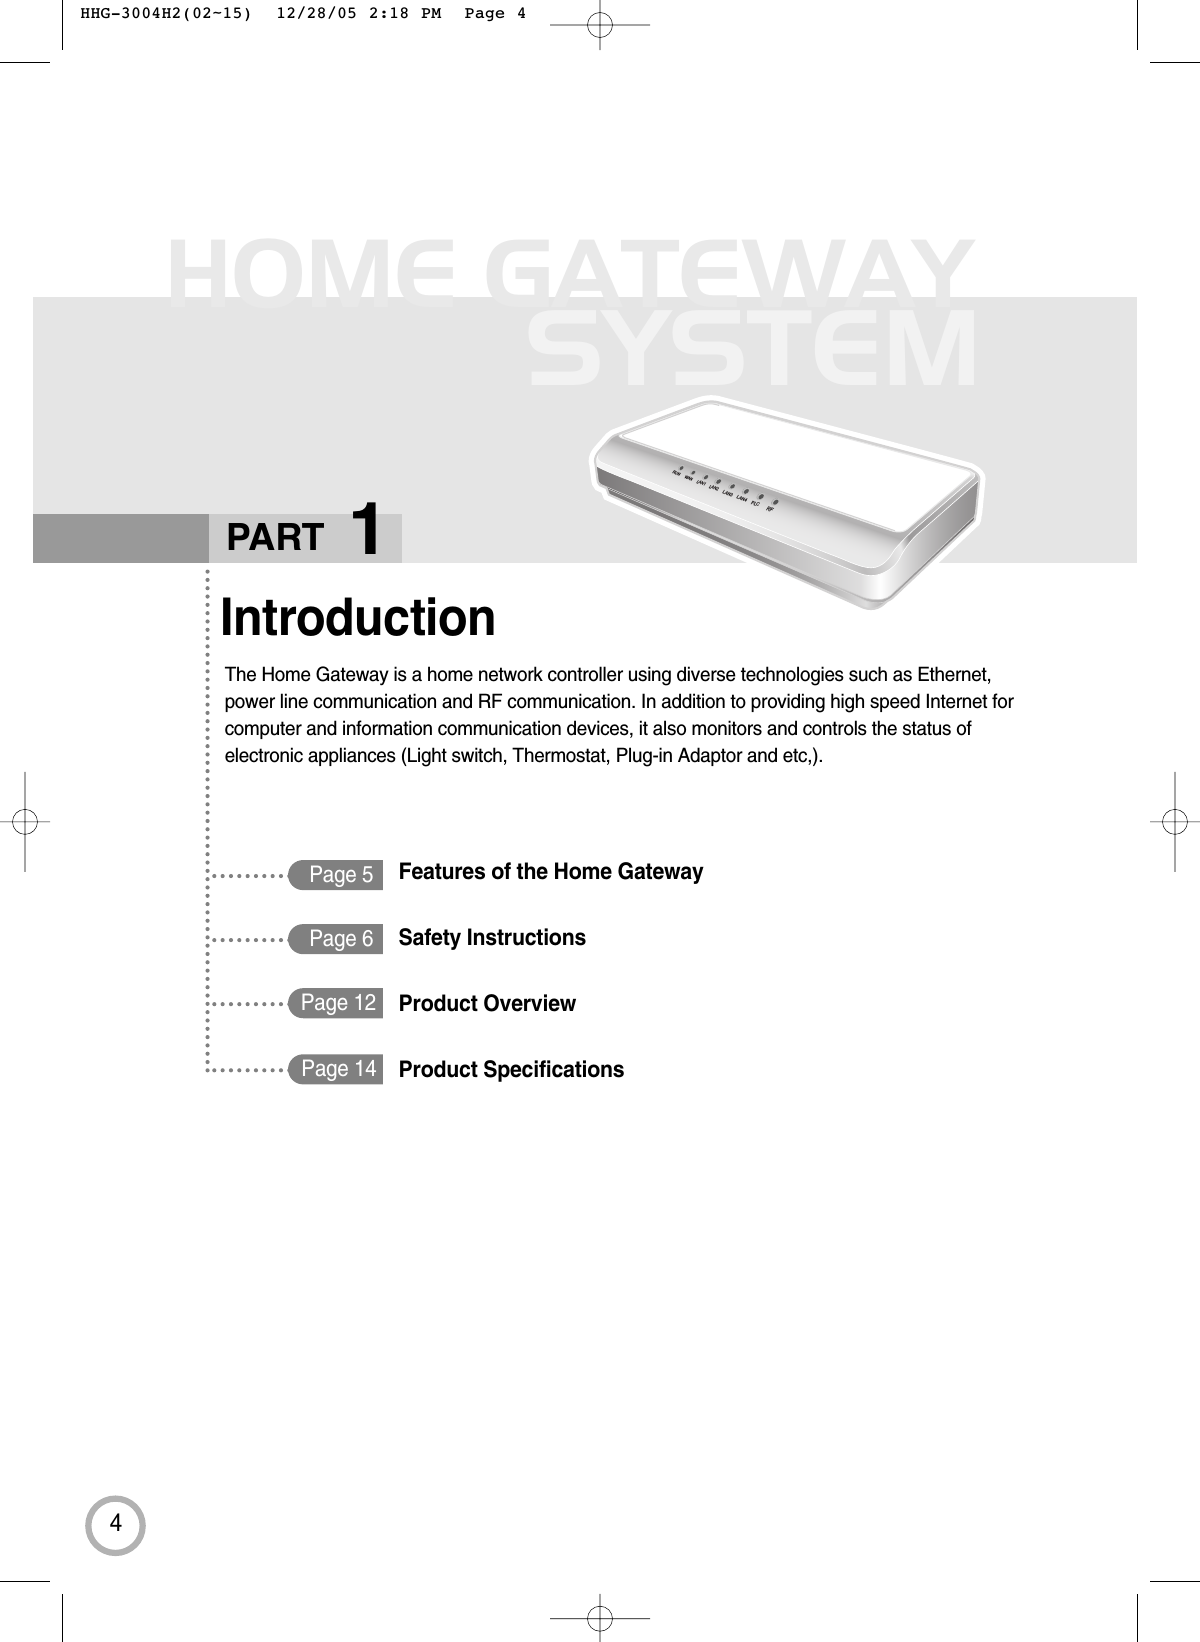 4HOME GATEWAYSYSTEMPage 5IntroductionThe Home Gateway is a home network controller using diverse technologies such as Ethernet, power line communication and RF communication. In addition to providing high speed Internet forcomputer and information communication devices, it also monitors and controls the status ofelectronic appliances (Light switch, Thermostat, Plug-in Adaptor and etc,).PART 1RUN WANLAN1LAN2LAN3LAN4PLCRFPage 6Page 12Page 14Features of the Home GatewaySafety InstructionsProduct Overview Product Specifications HHG-3004H2(02~15)  12/28/05 2:18 PM  Page 4